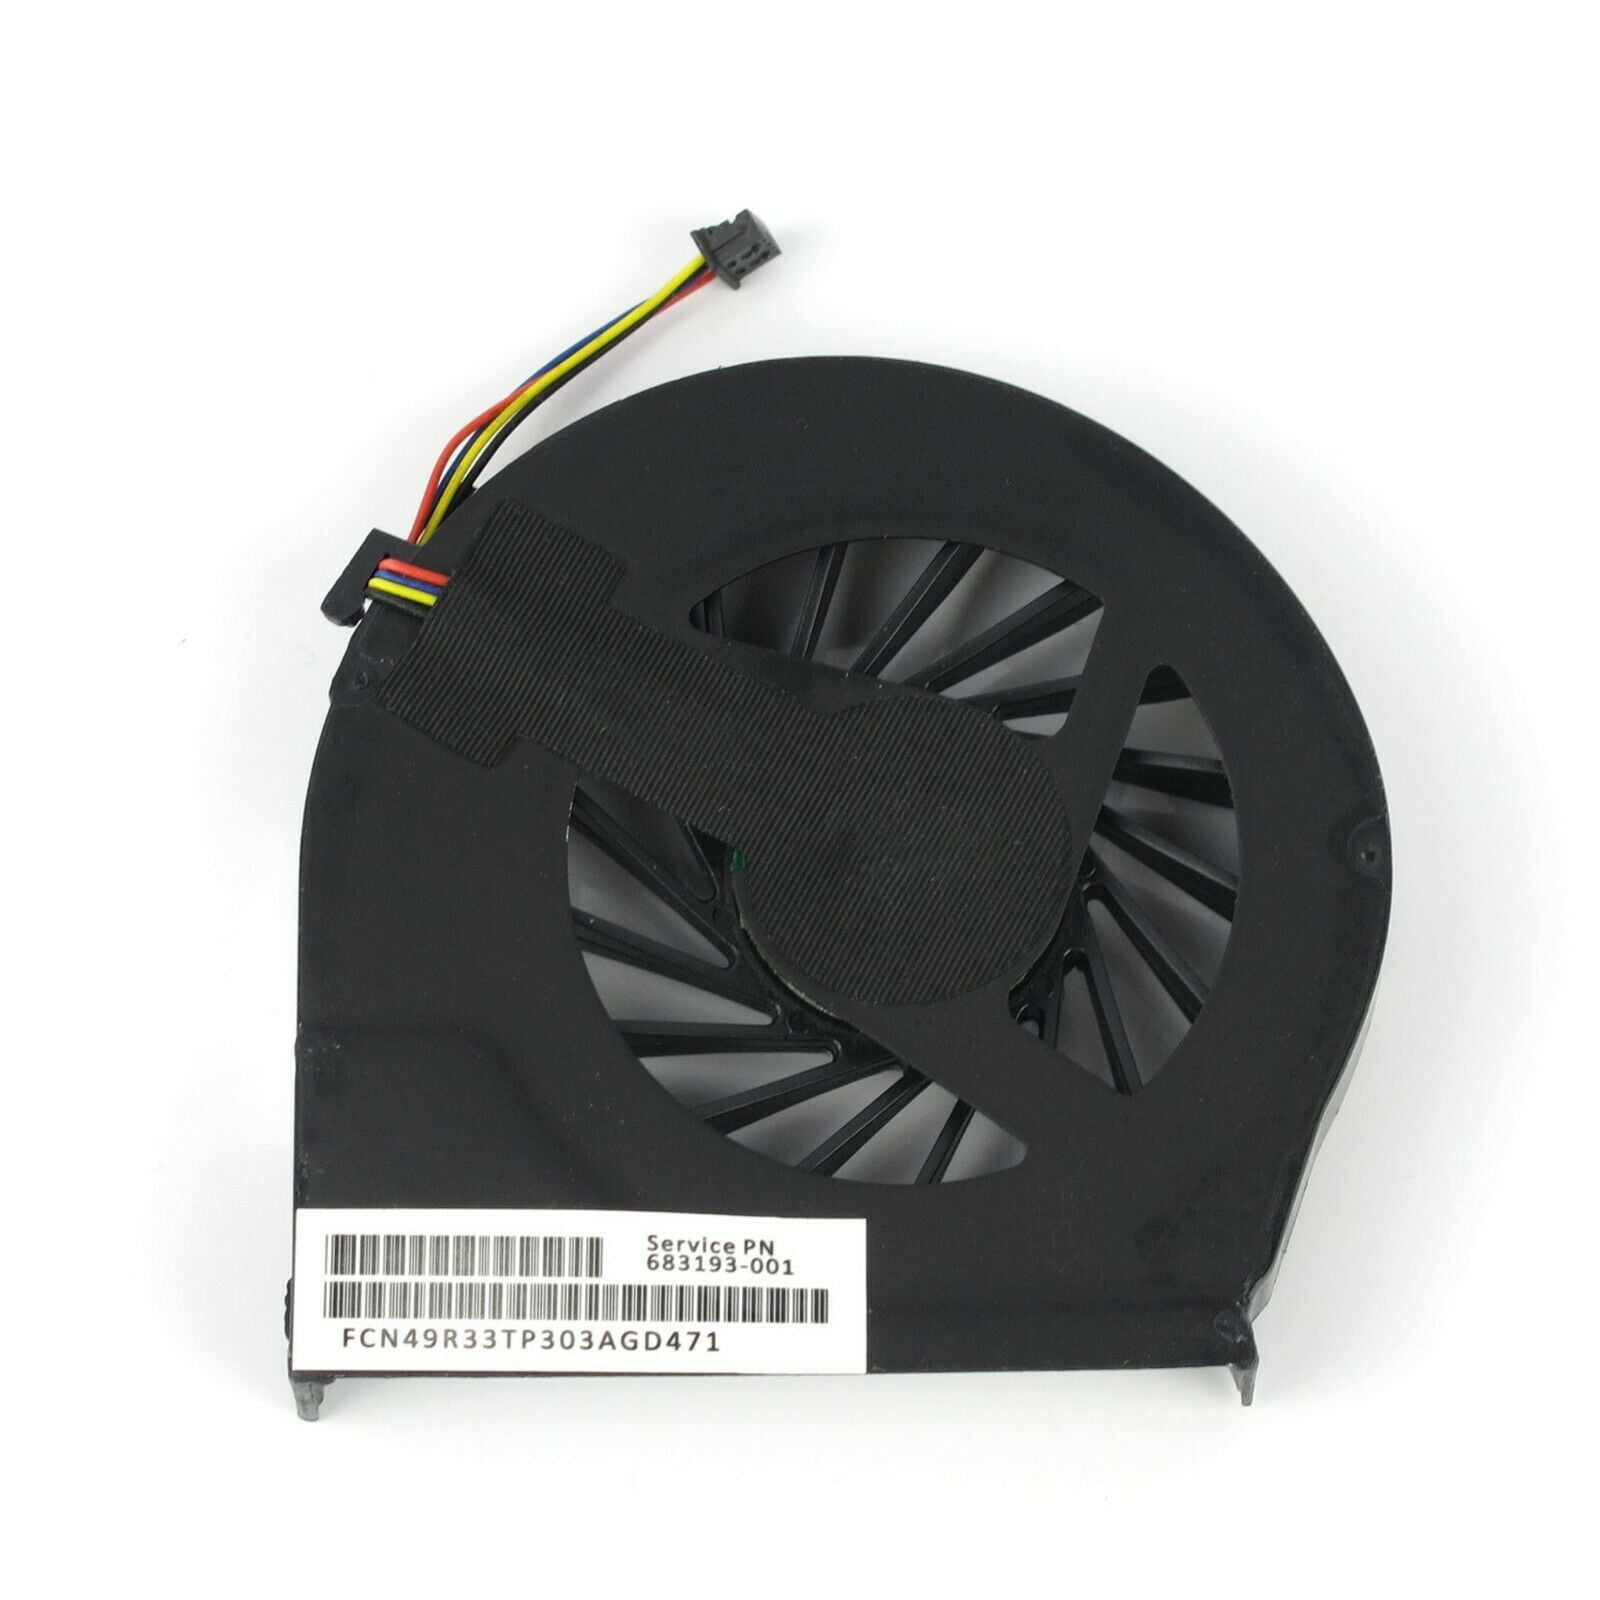 New Laptop CPU Cooling Fan Replacement for HP Pavilion G7-2000 Series P/N 683193-001 